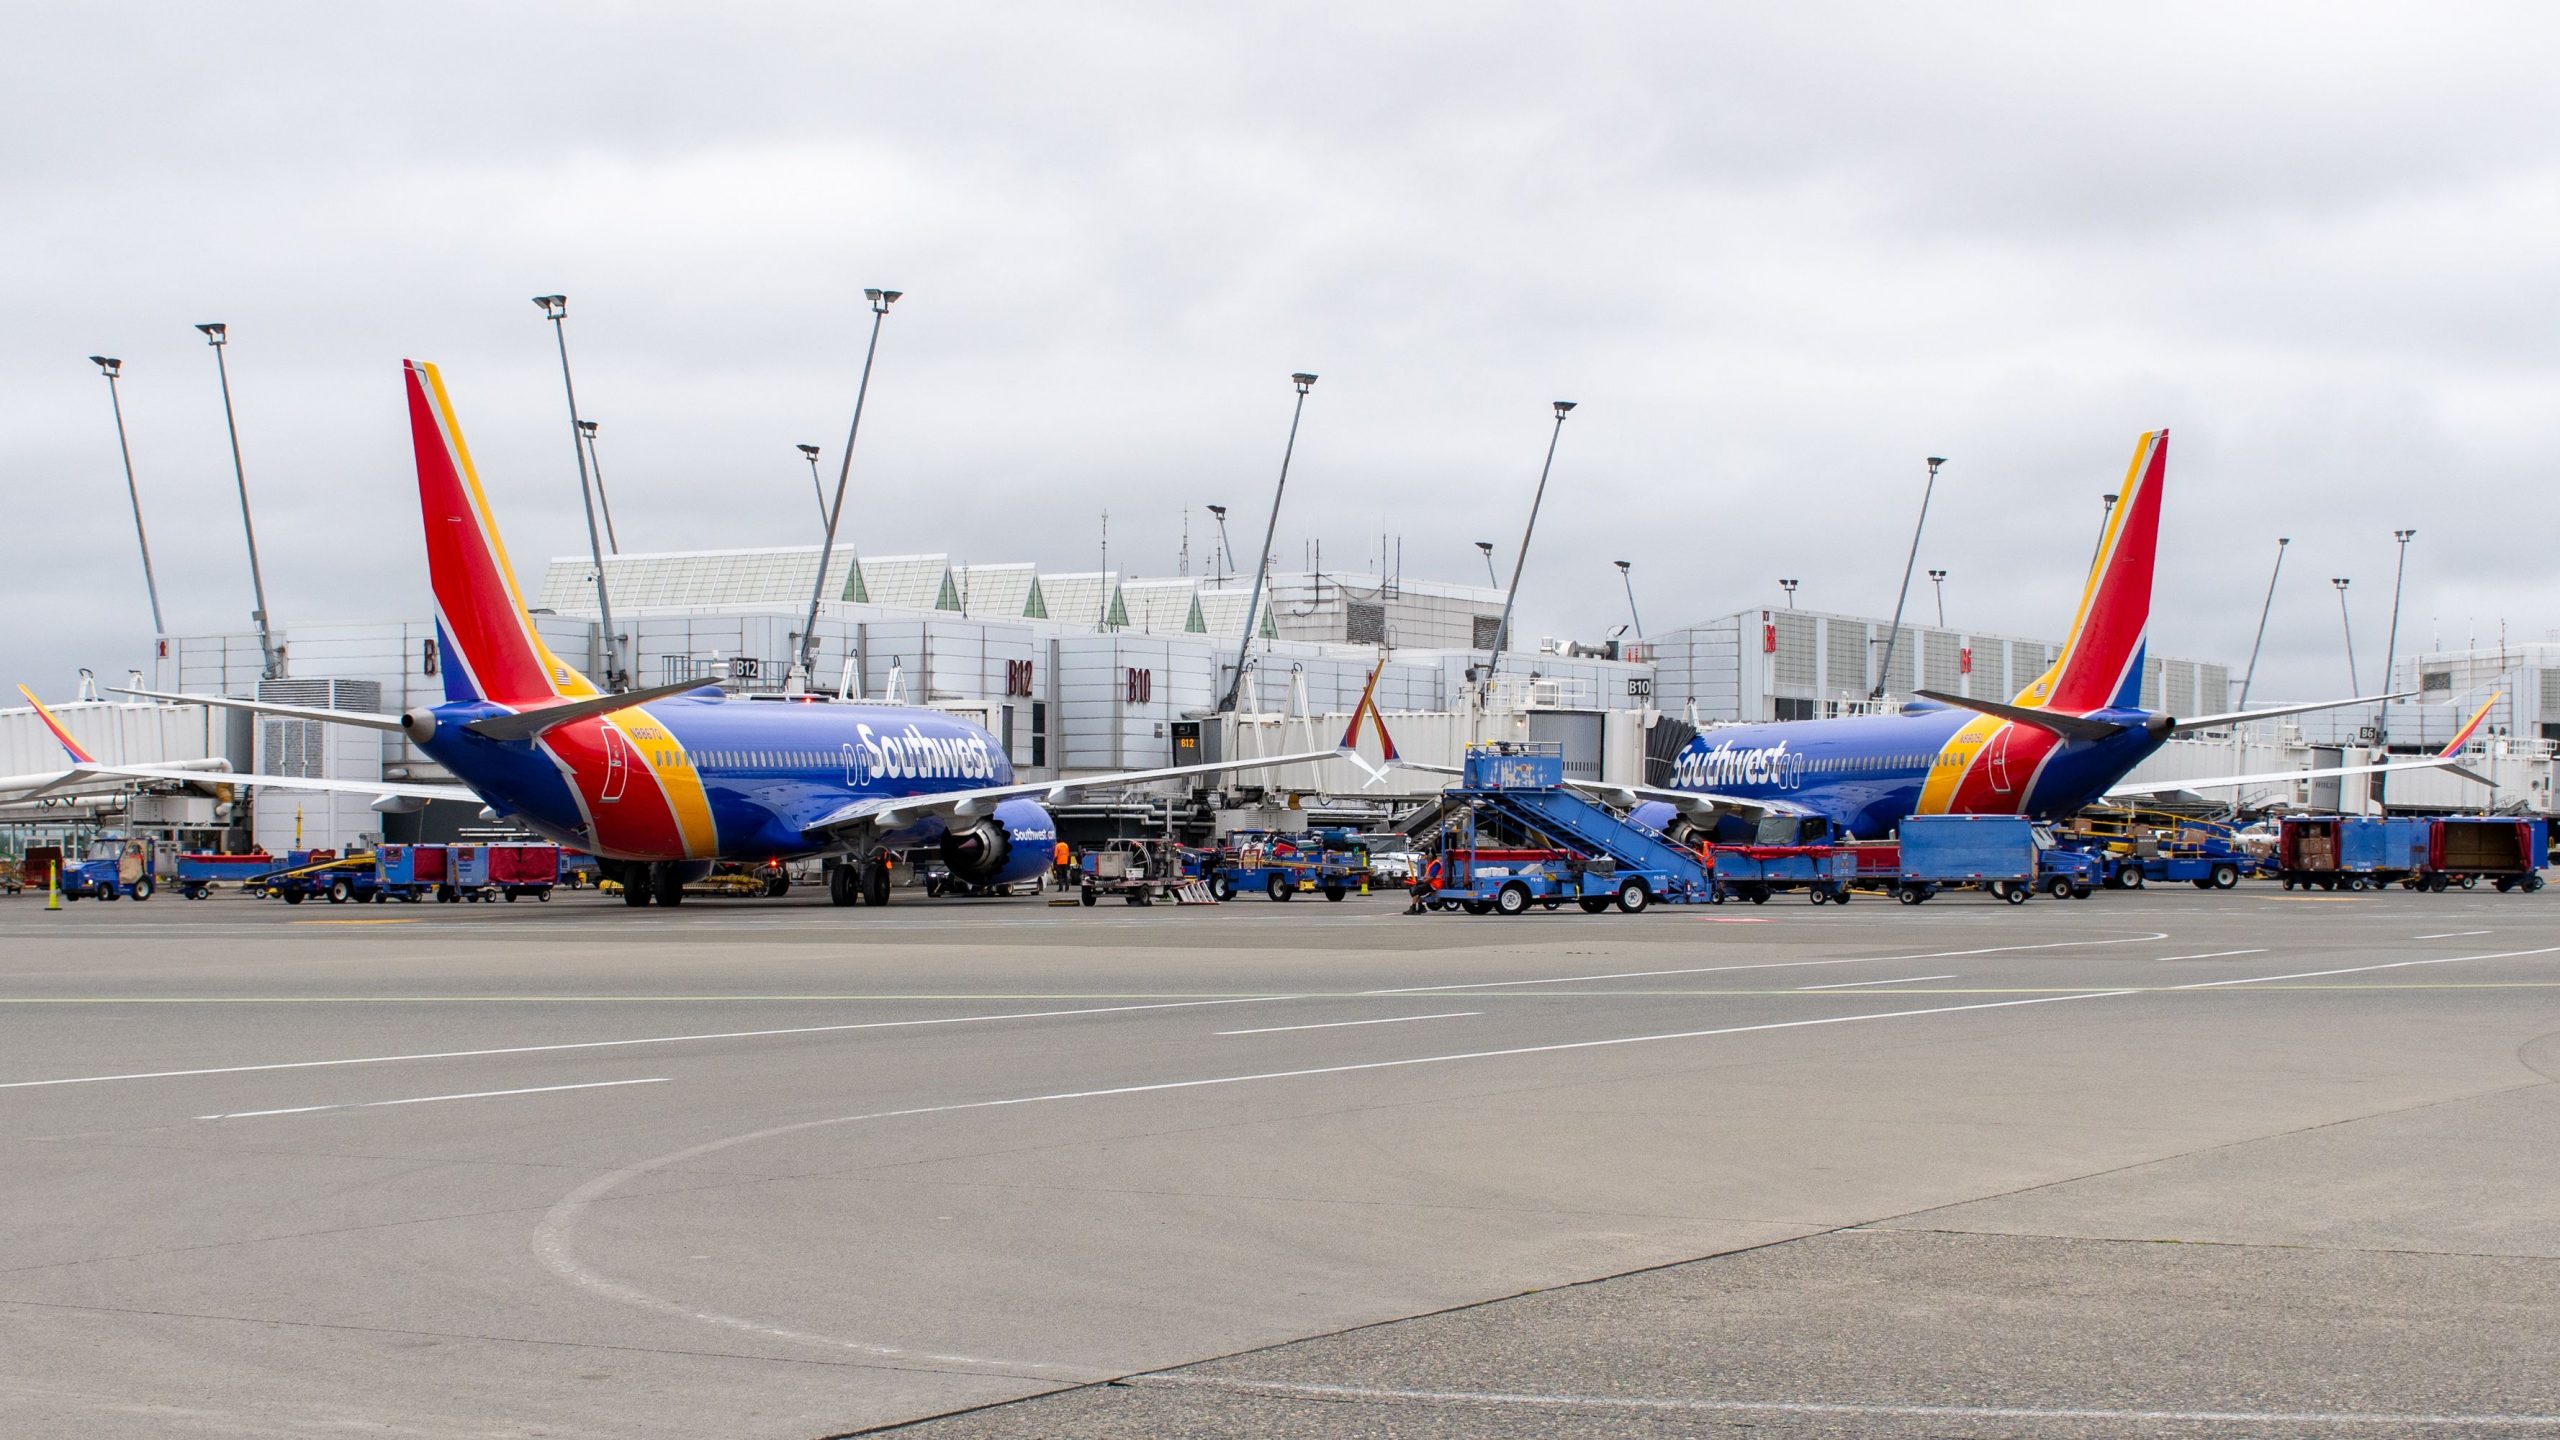 Planning Your Budget-Friendly Travels: Southwest Airlines' Low Fare Calendar Unveiled